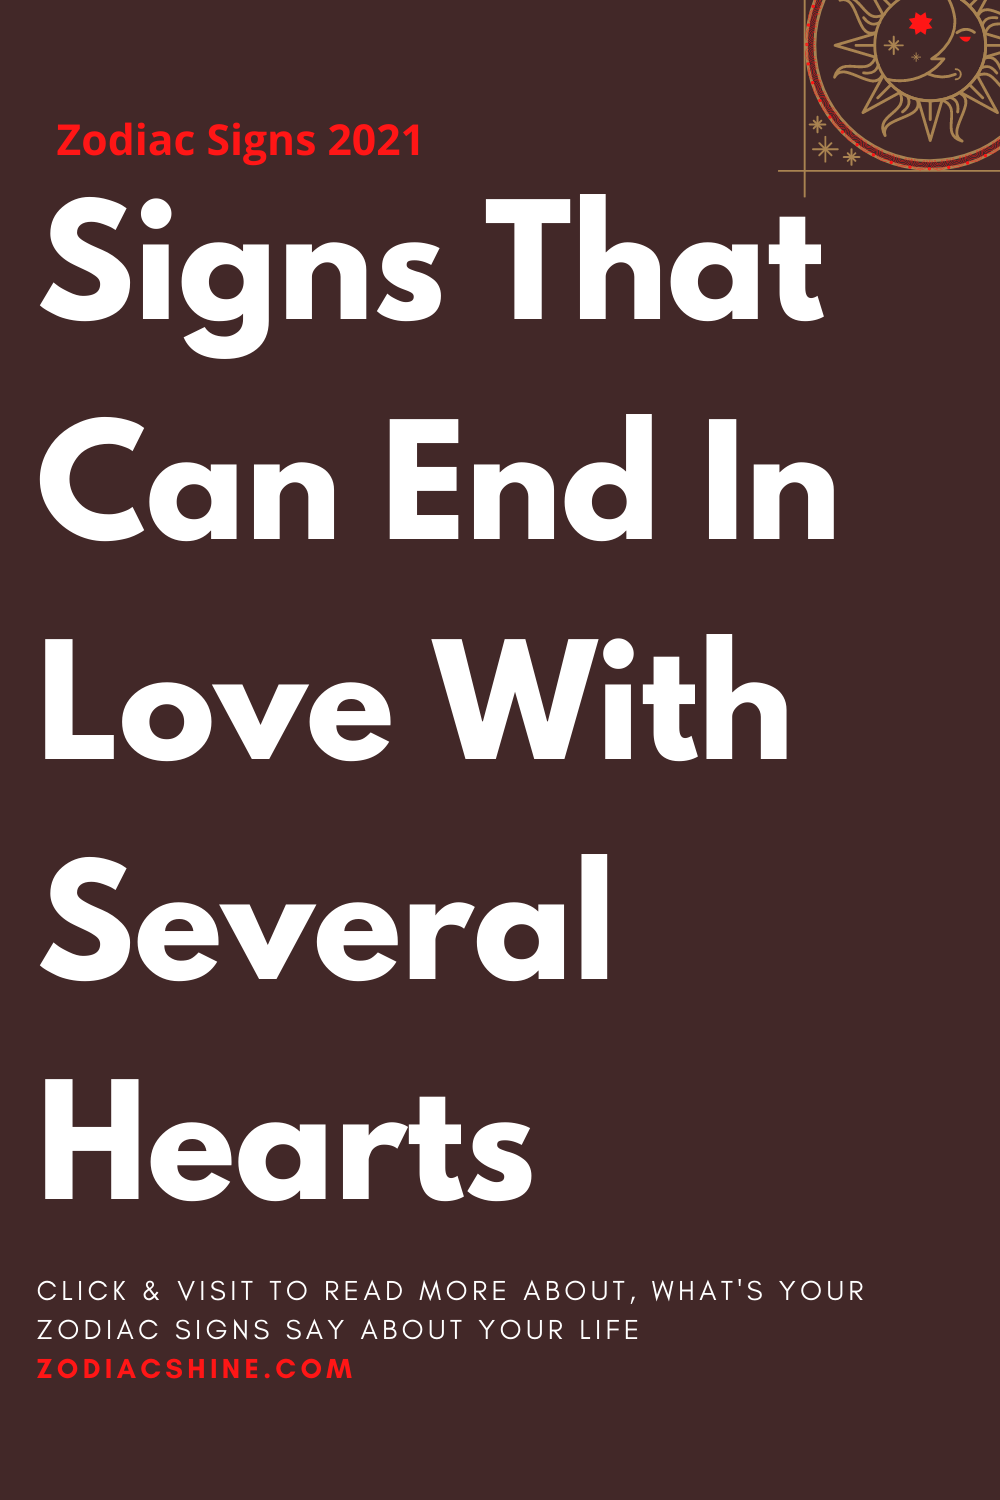 Signs That Can End In Love With Several Hearts